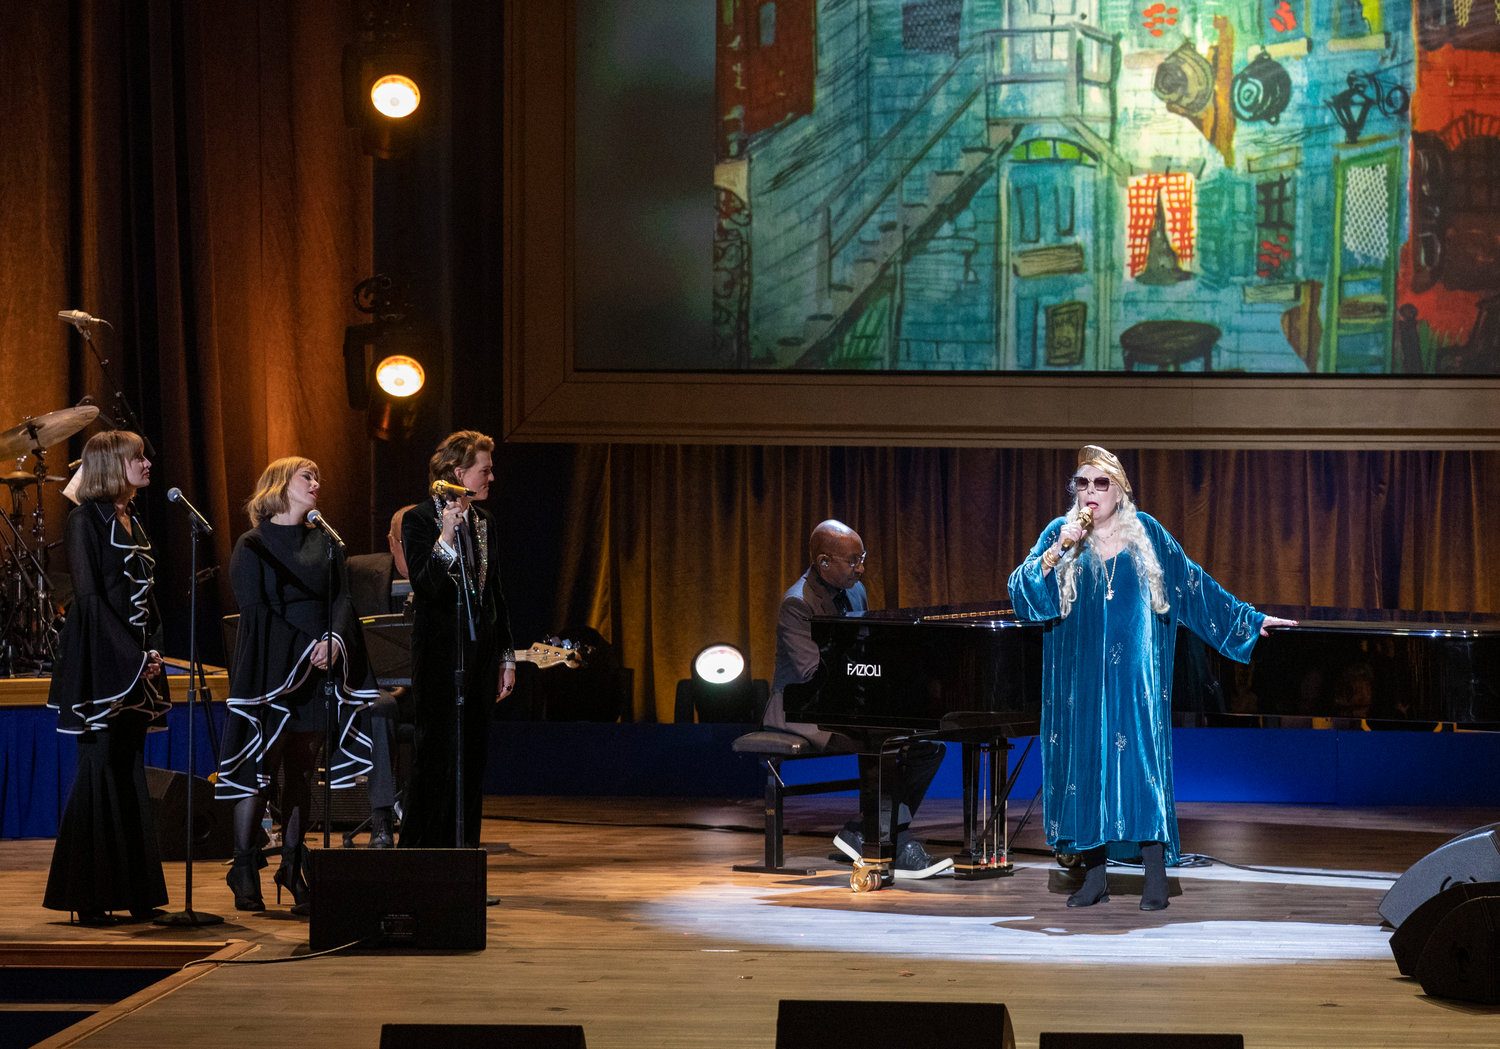 Joni Mitchell, right, performs at the presentation of the Gershwin Prize in Washington on March 1, 2023. "Joni Mitchell: The Library of Congress Gershwin Prize for Popular Song” will air on Friday on PBS.